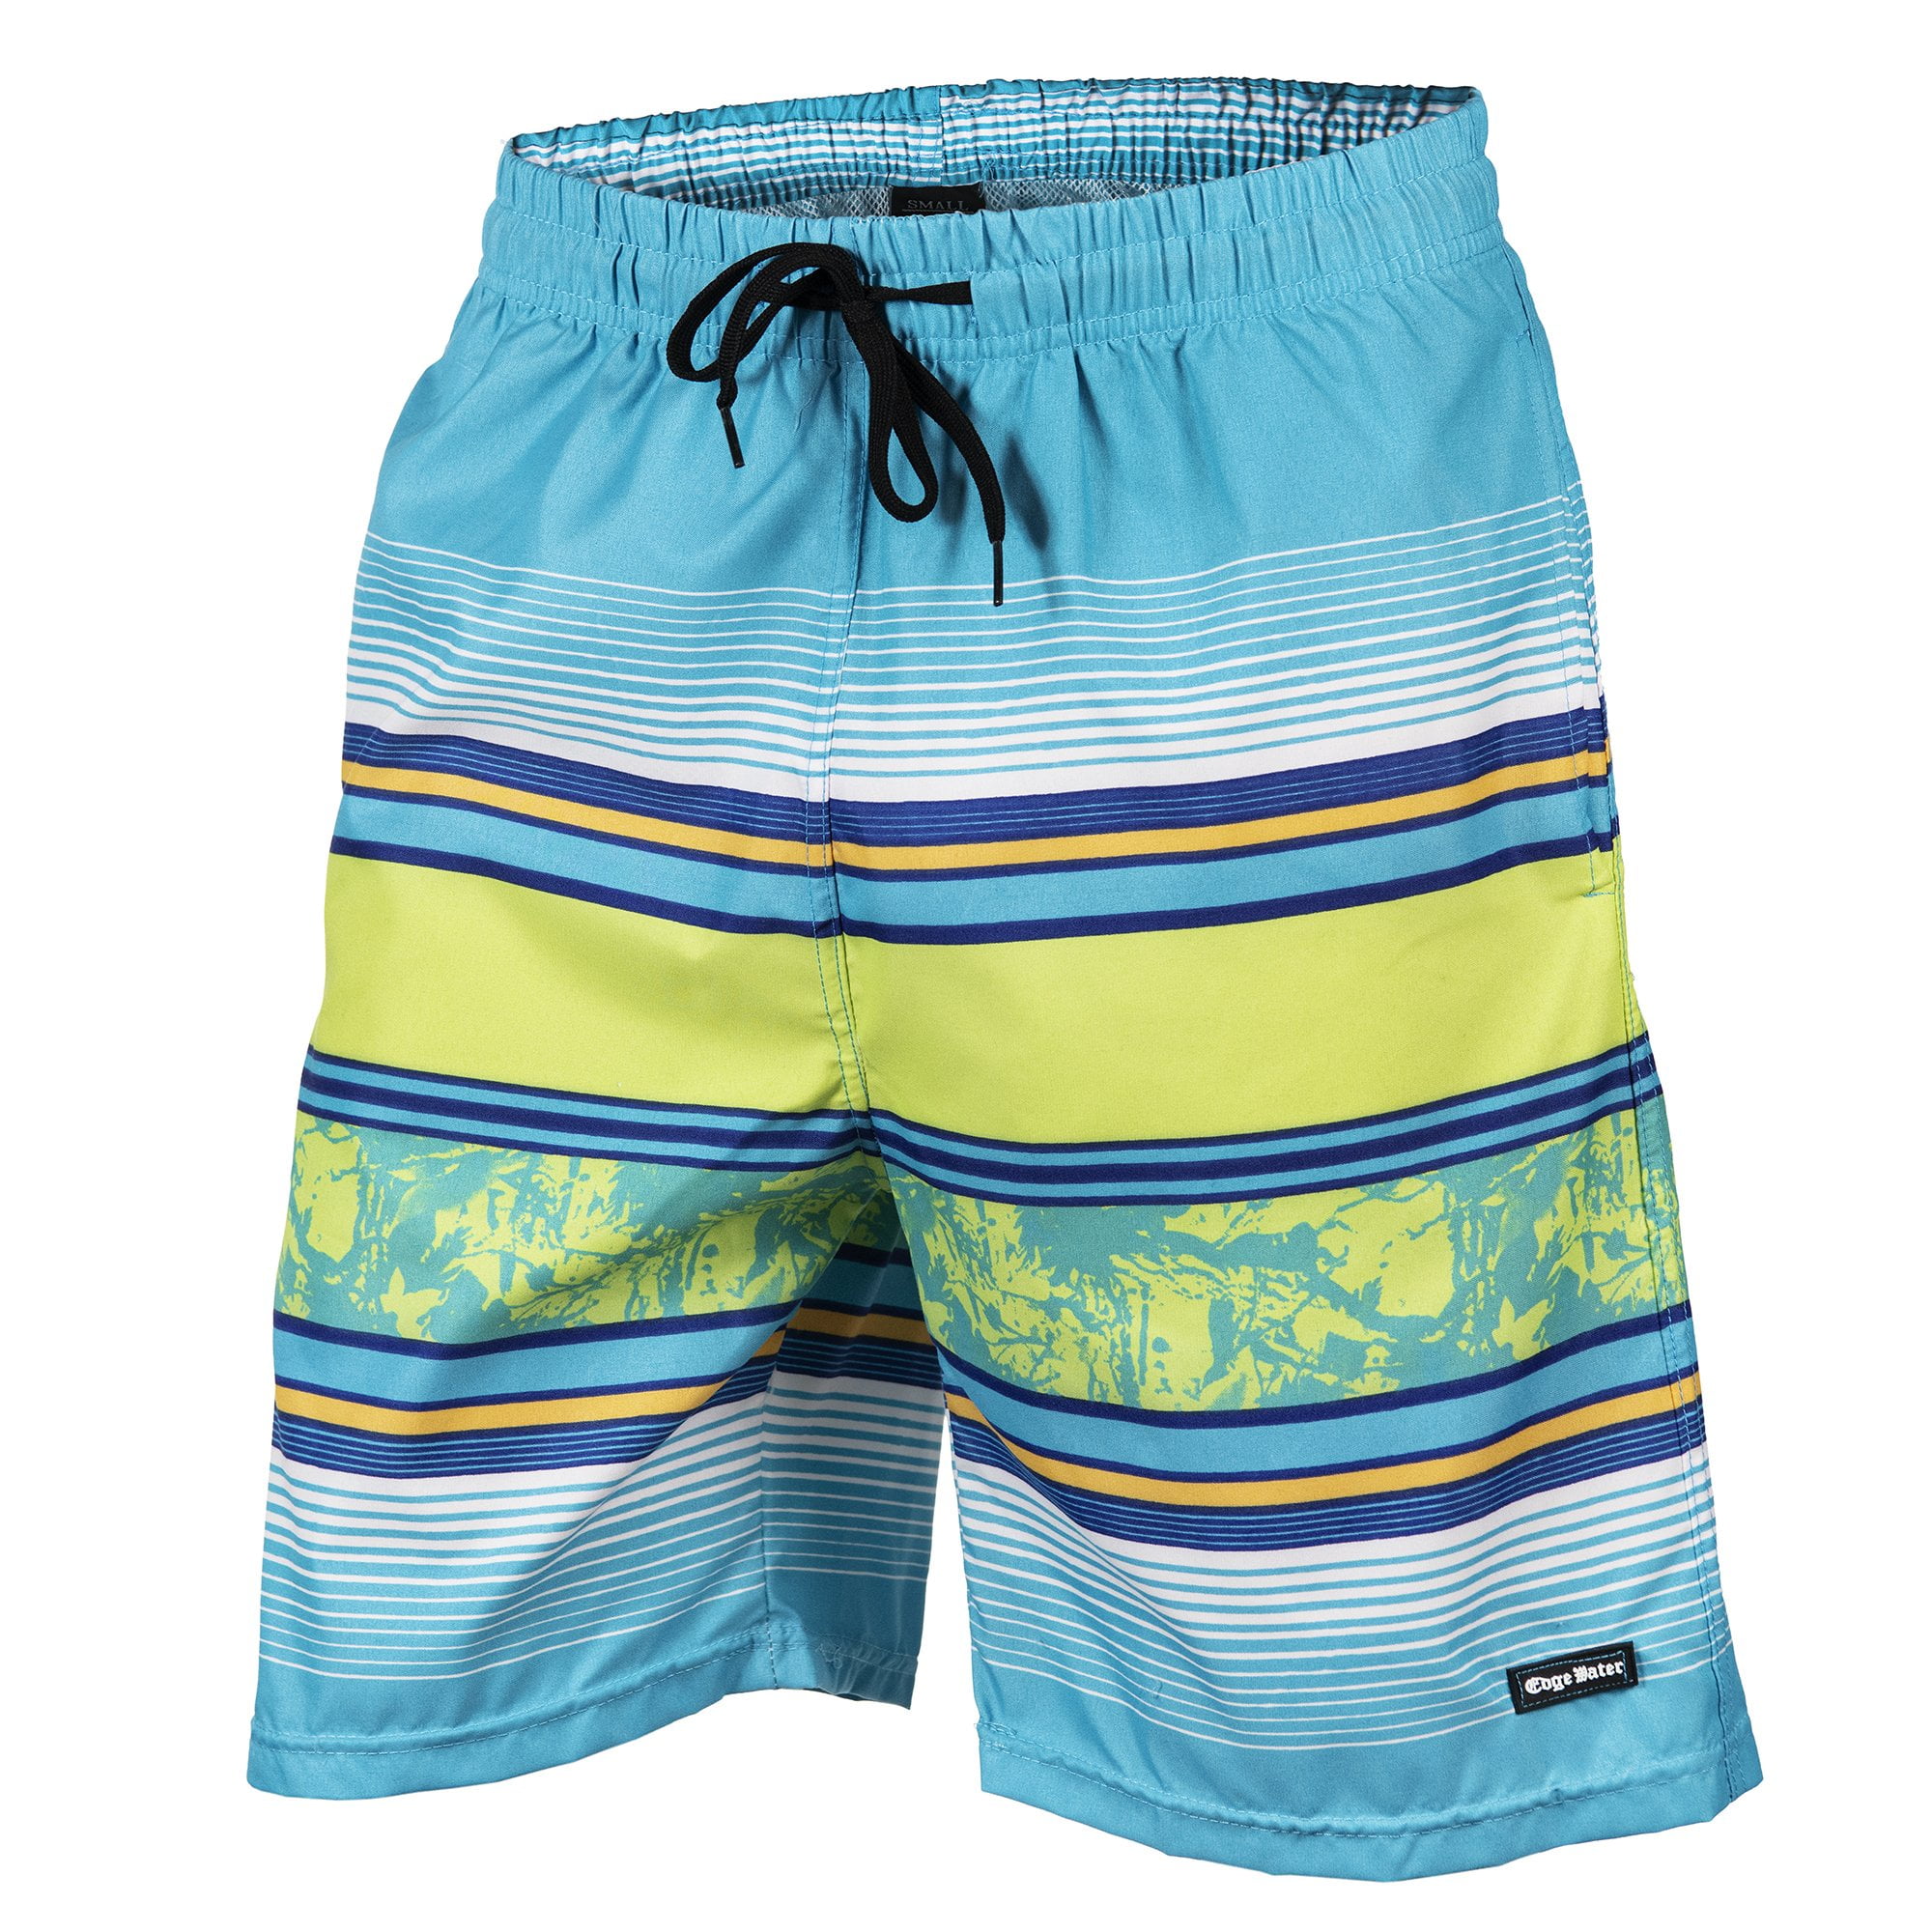 Mens Swim Trunks with Mesh Lining Pockets Colorful Rings Boys Polyester Board Shorts Swimwear